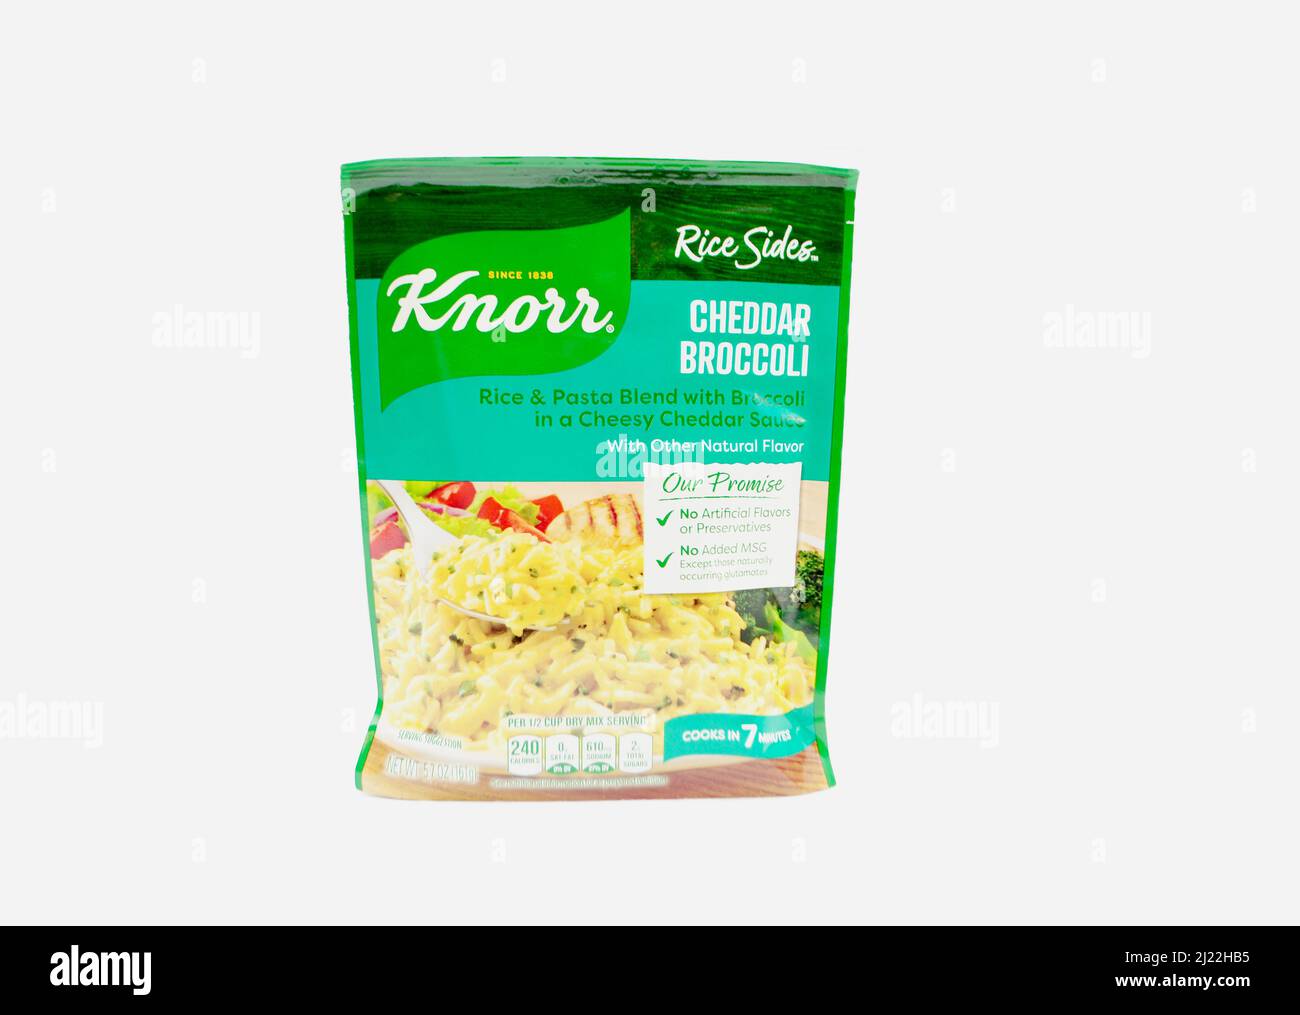 Knorr's Rice Sides - Cheddar and Broccoli Flavor Stock Photo